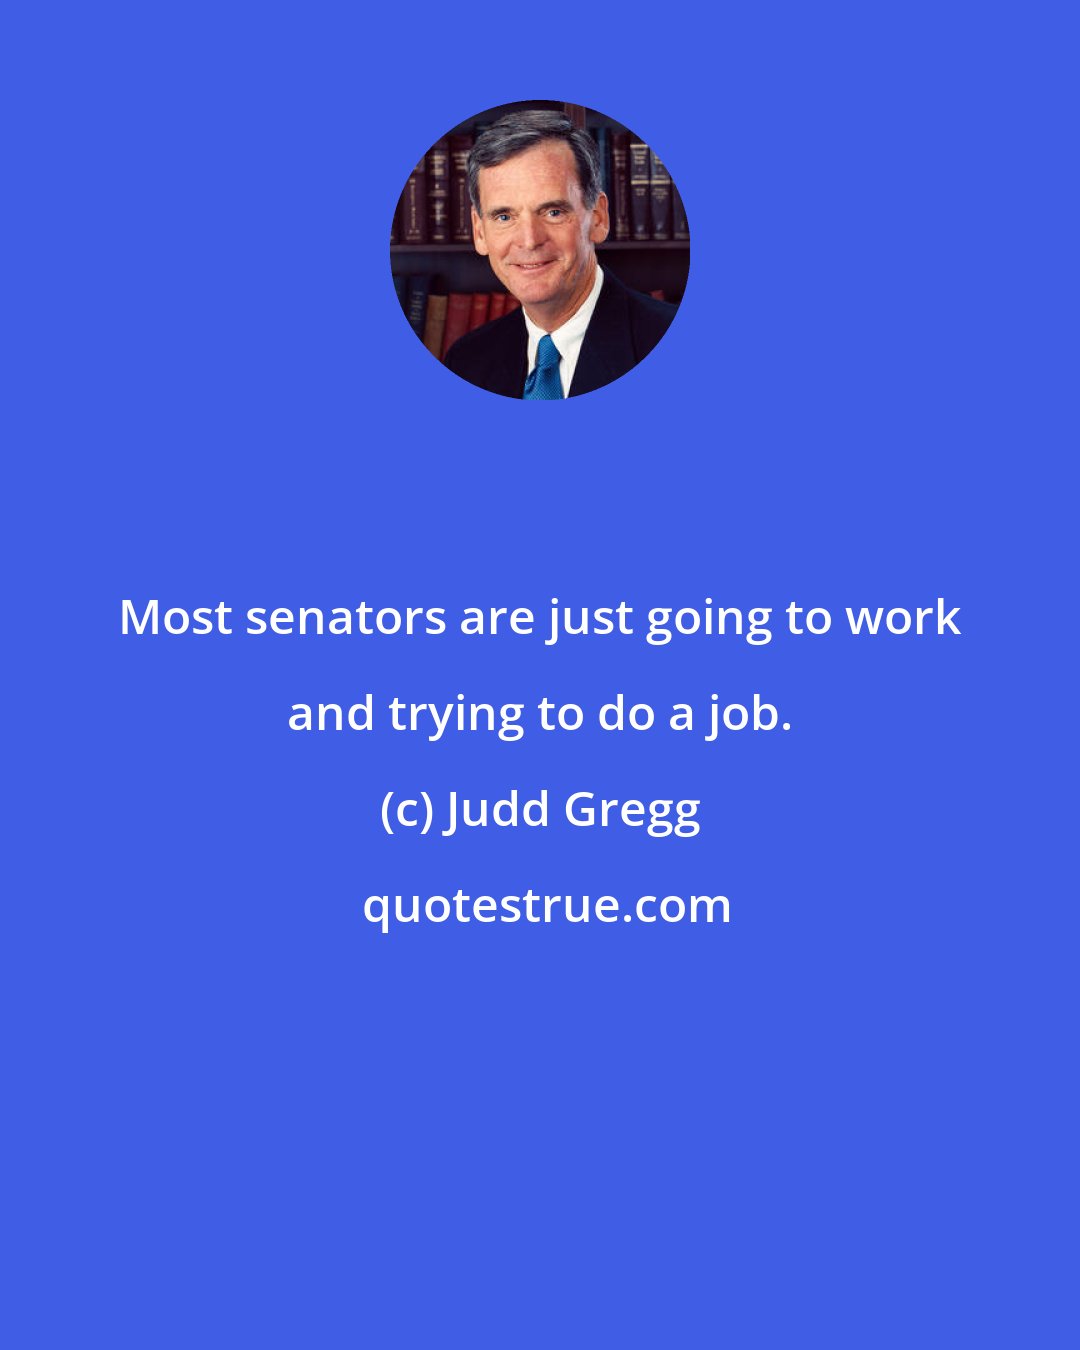 Judd Gregg: Most senators are just going to work and trying to do a job.